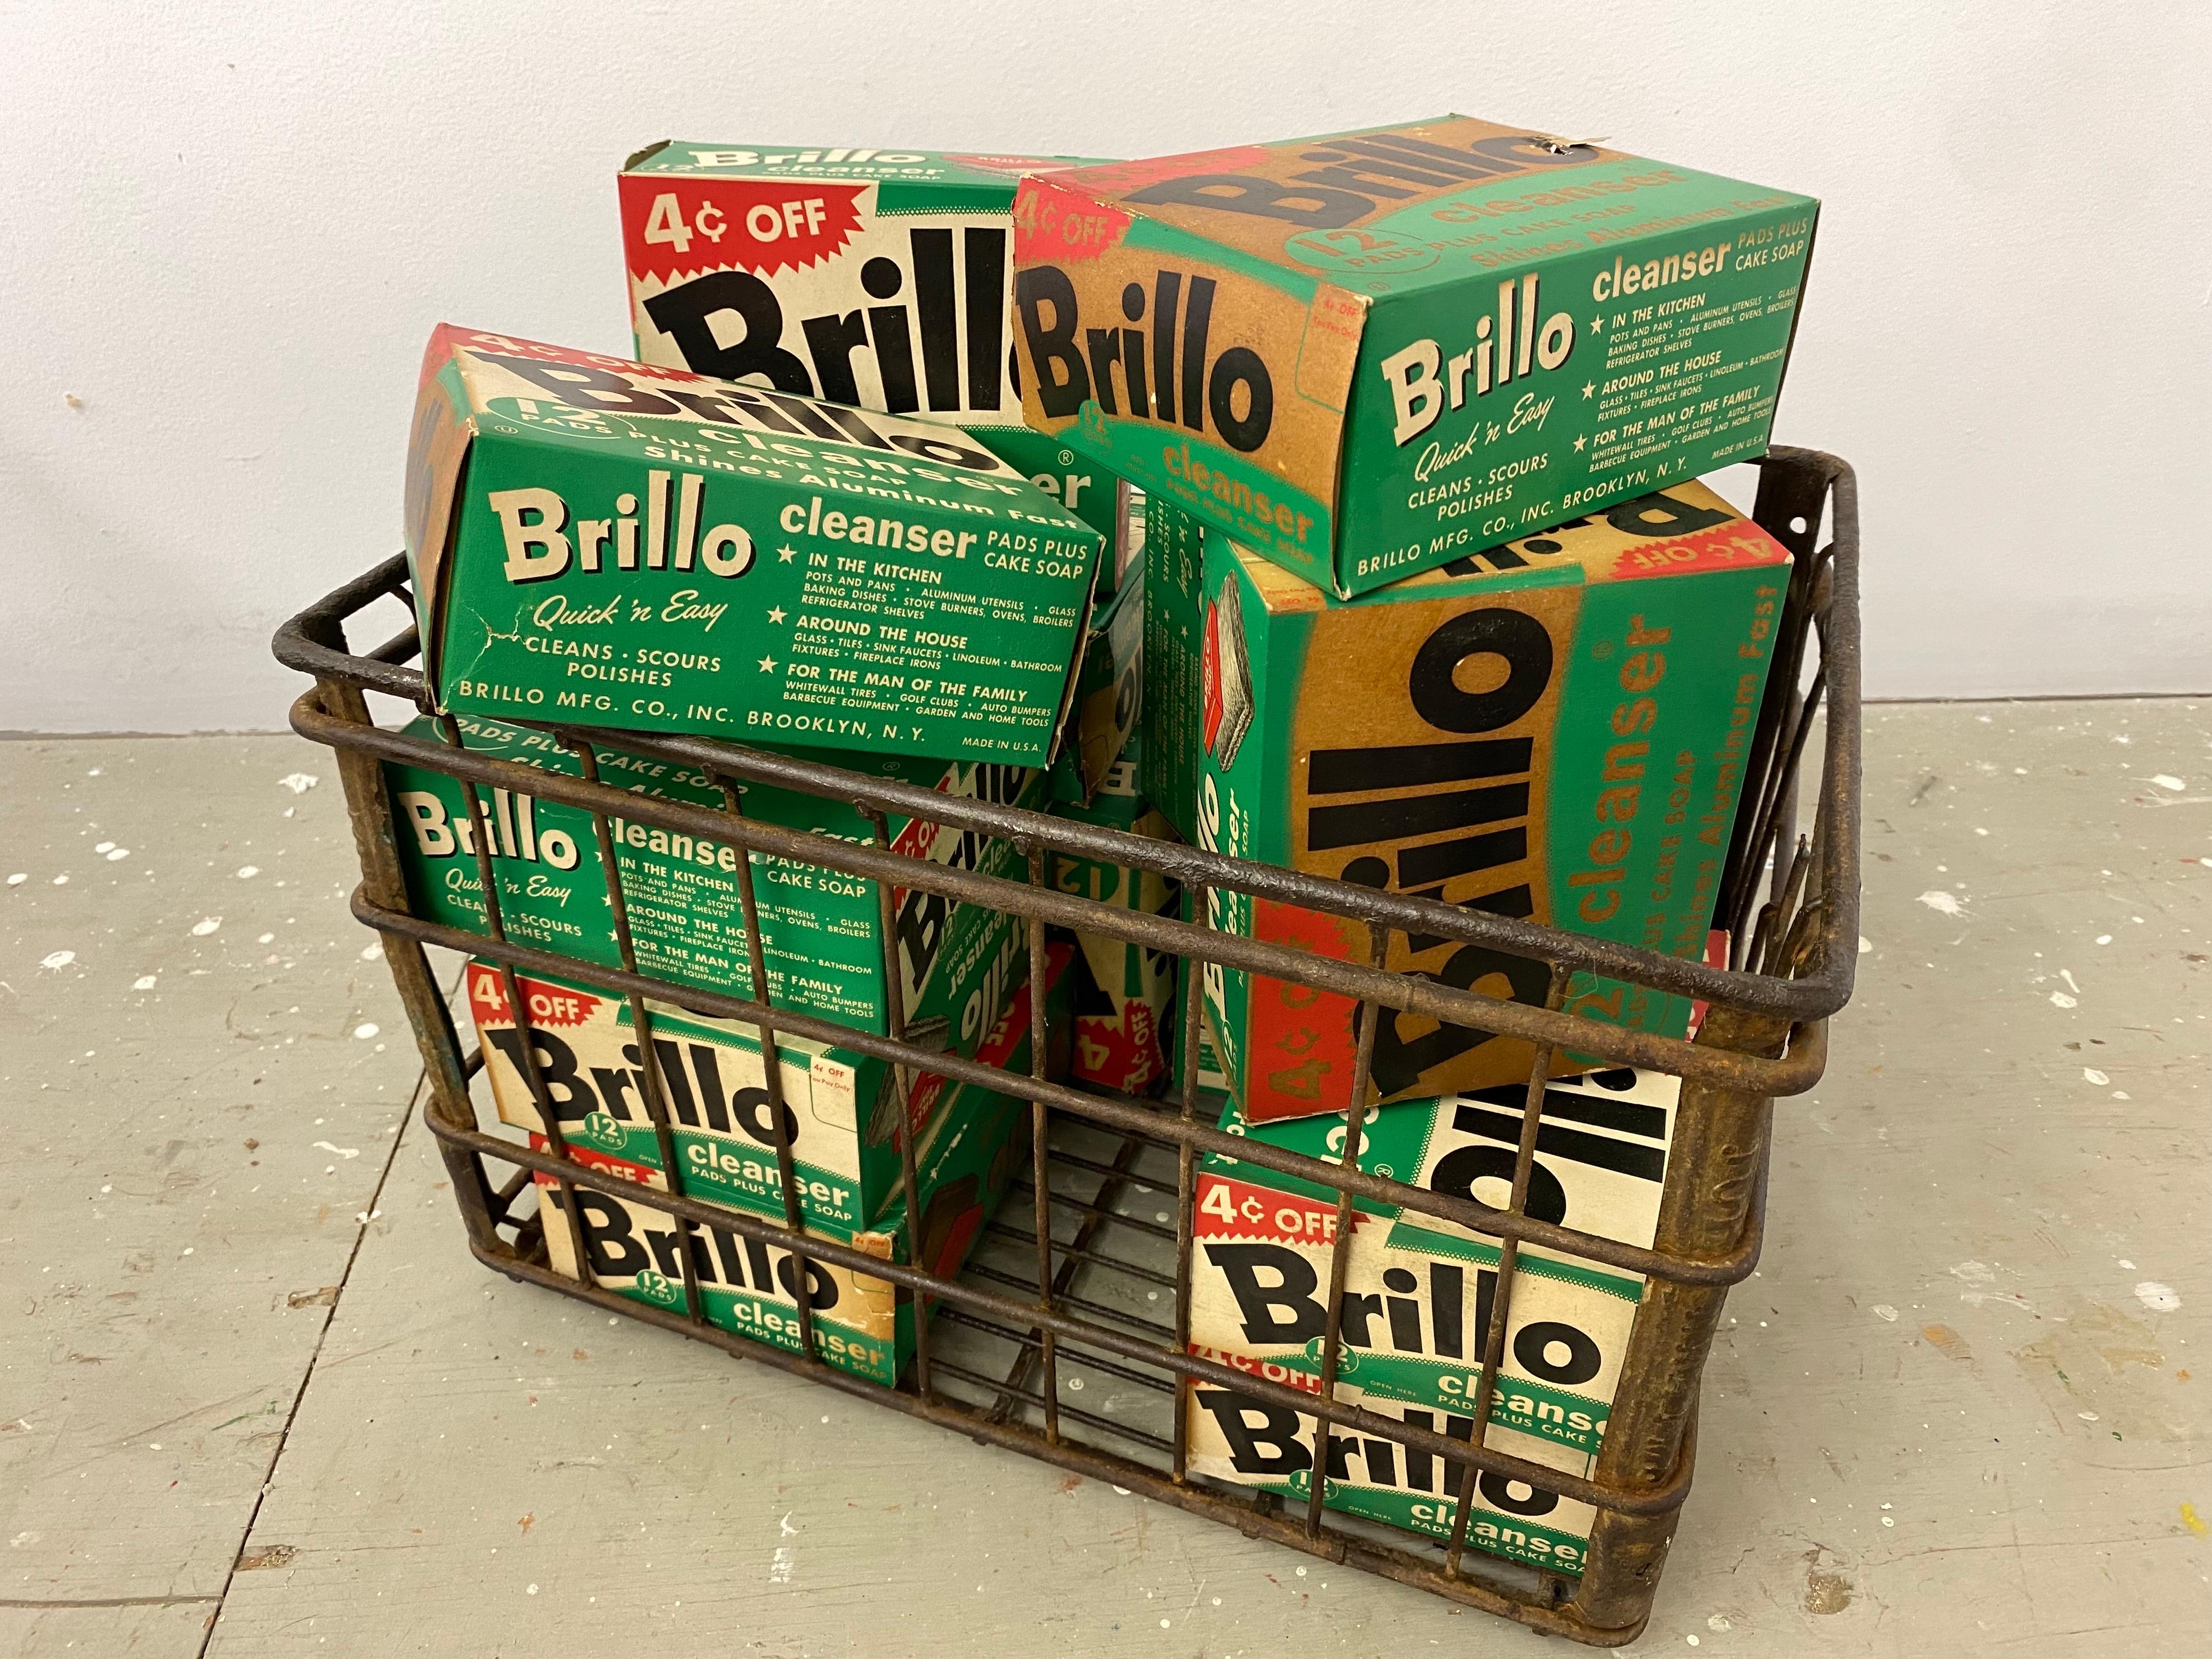 Modern Vintage Brillo Pad Boxes in Wire Crate, salute to Andy Warhol